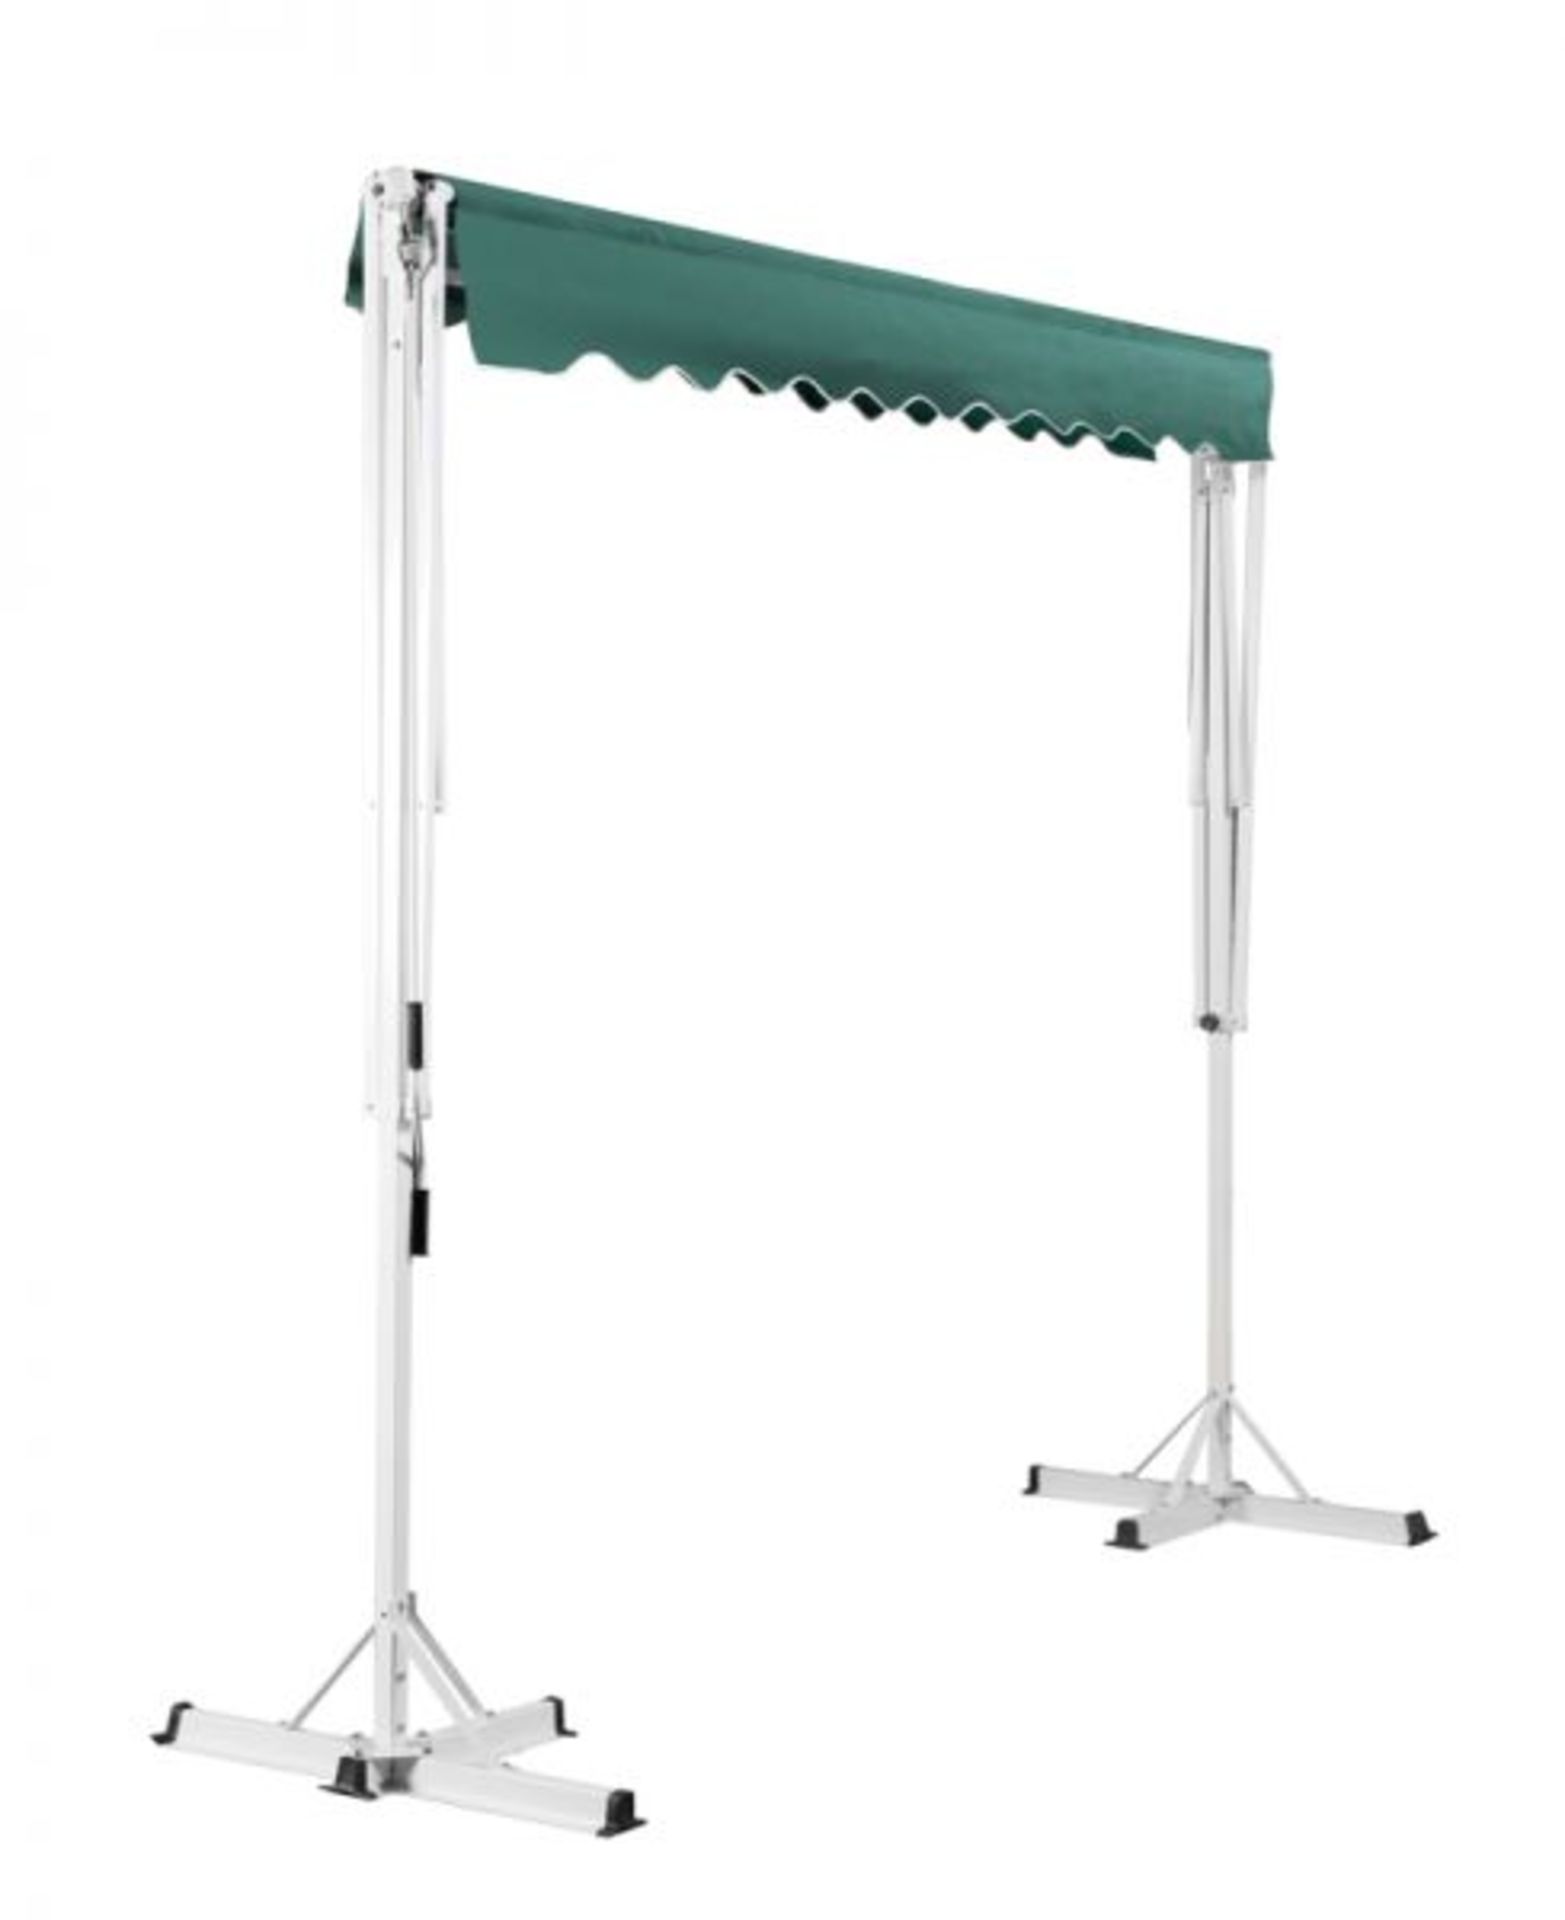 Butterfly Awnings green 3 Metres Long 3 Metre Wide RRP £494 - Image 2 of 2